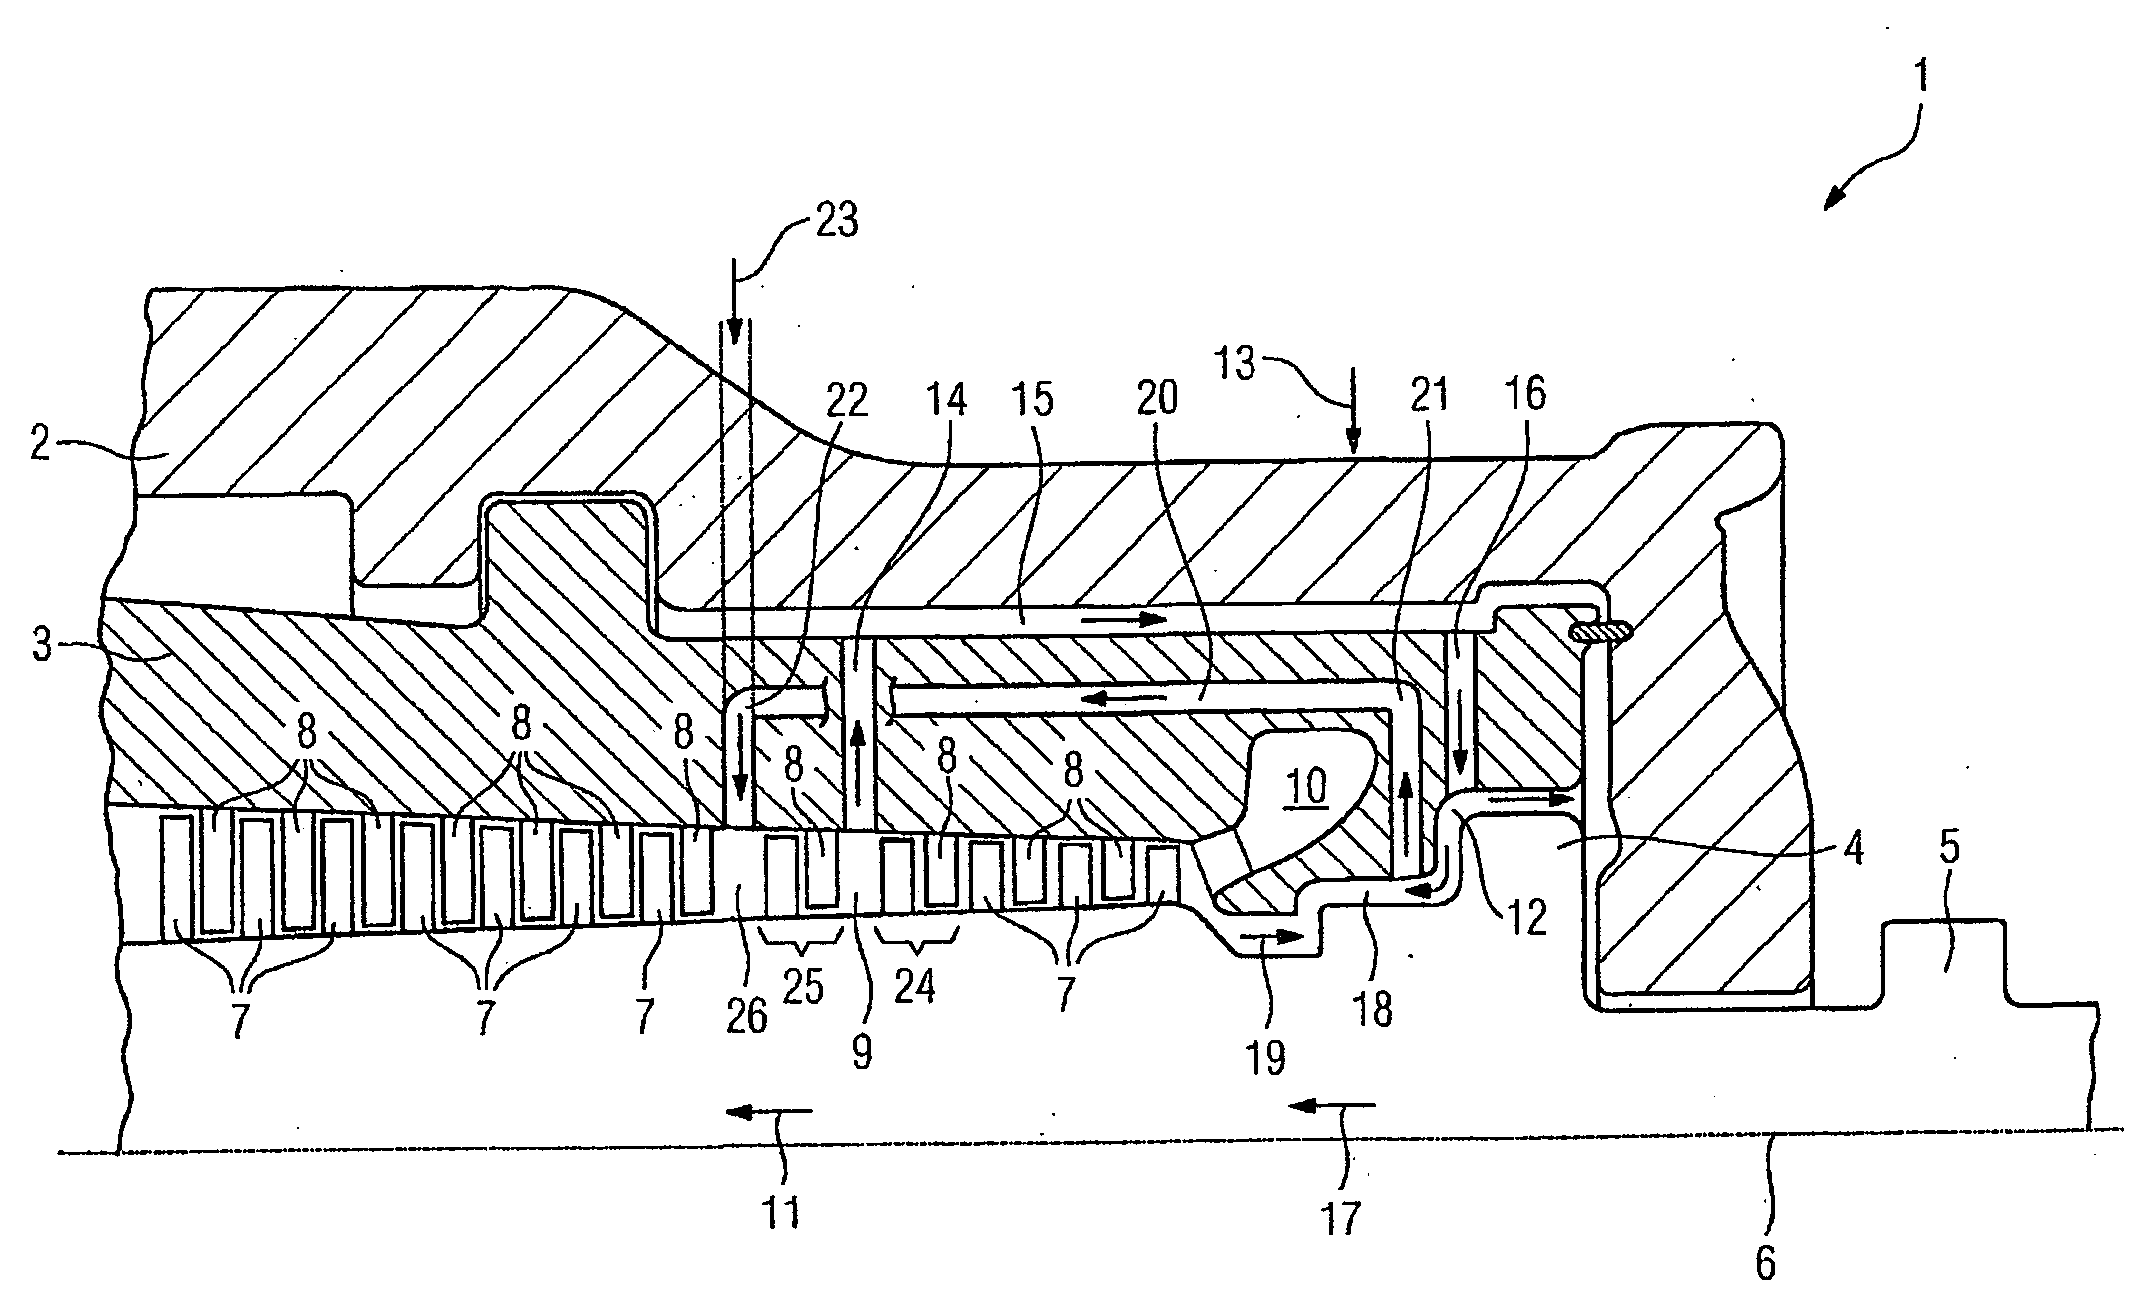 Steam Turbine and Method for Operation of a Steam Turbine